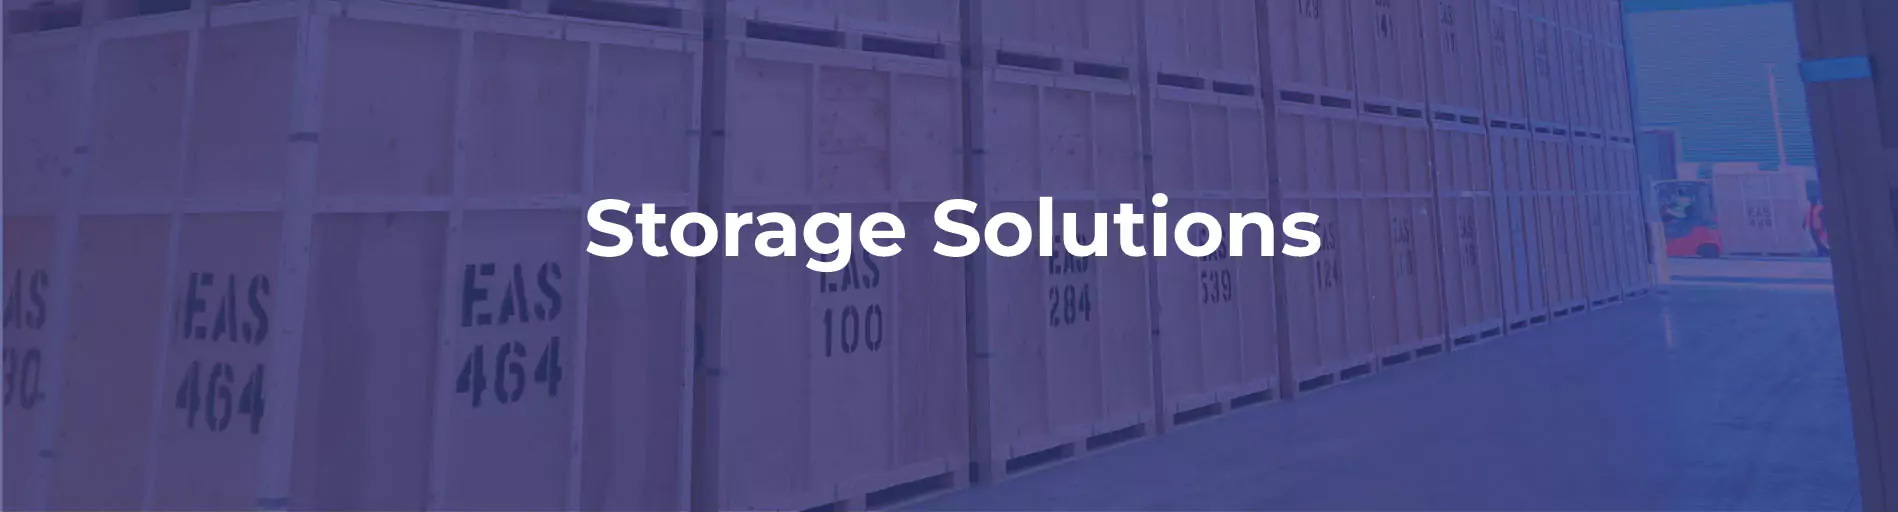 easy shipping storage solutions provider